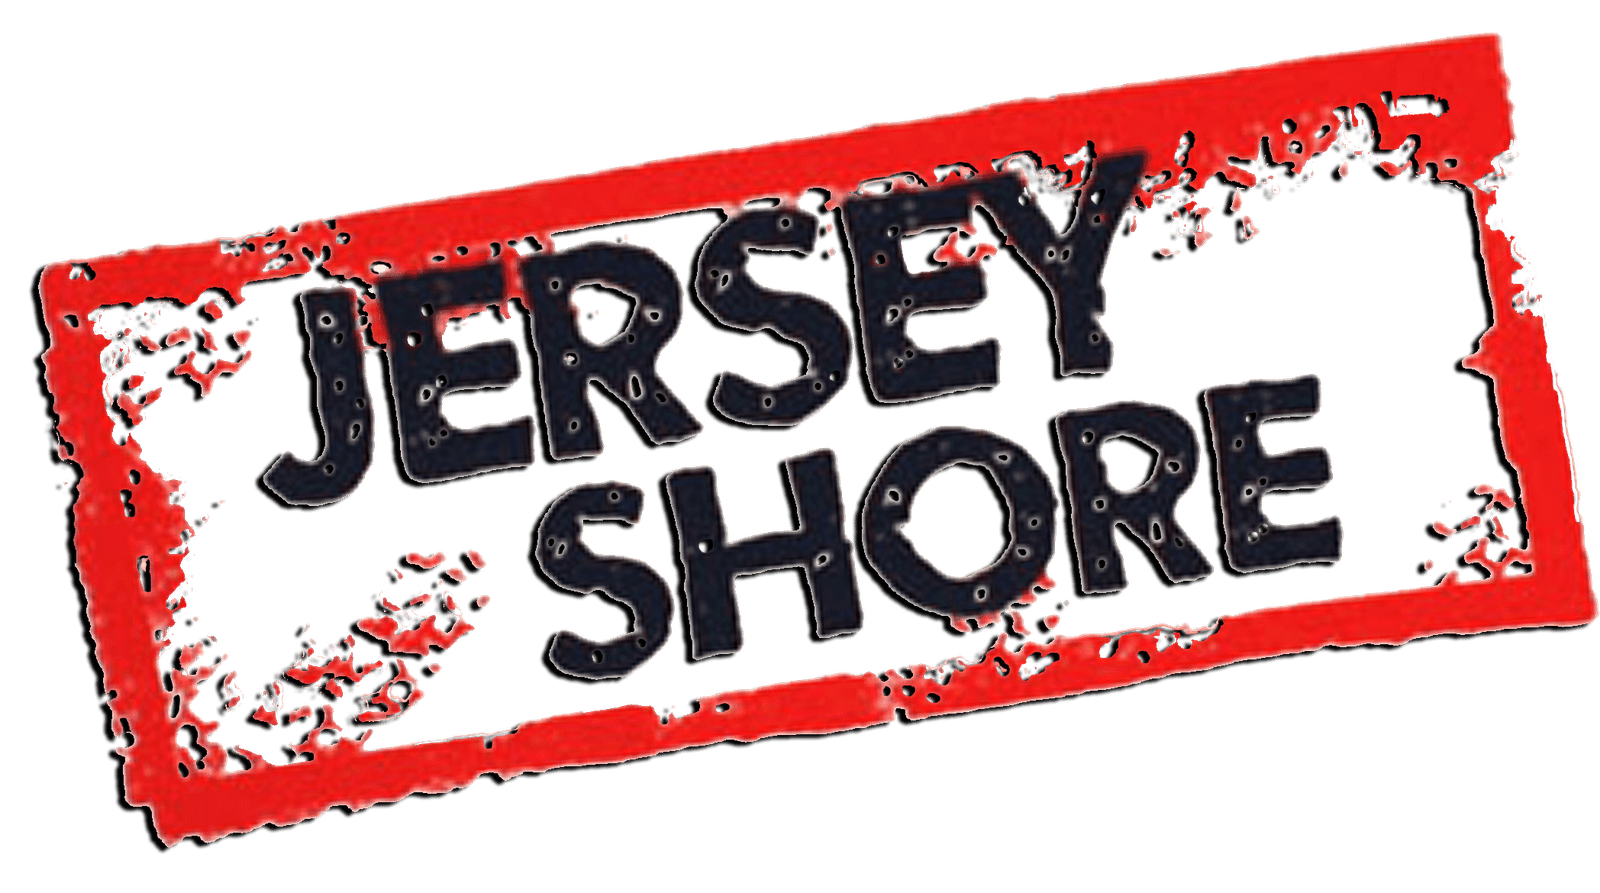 Shore Logo - Anxiety & Depression disorders: lessons learned from Jersey Shore